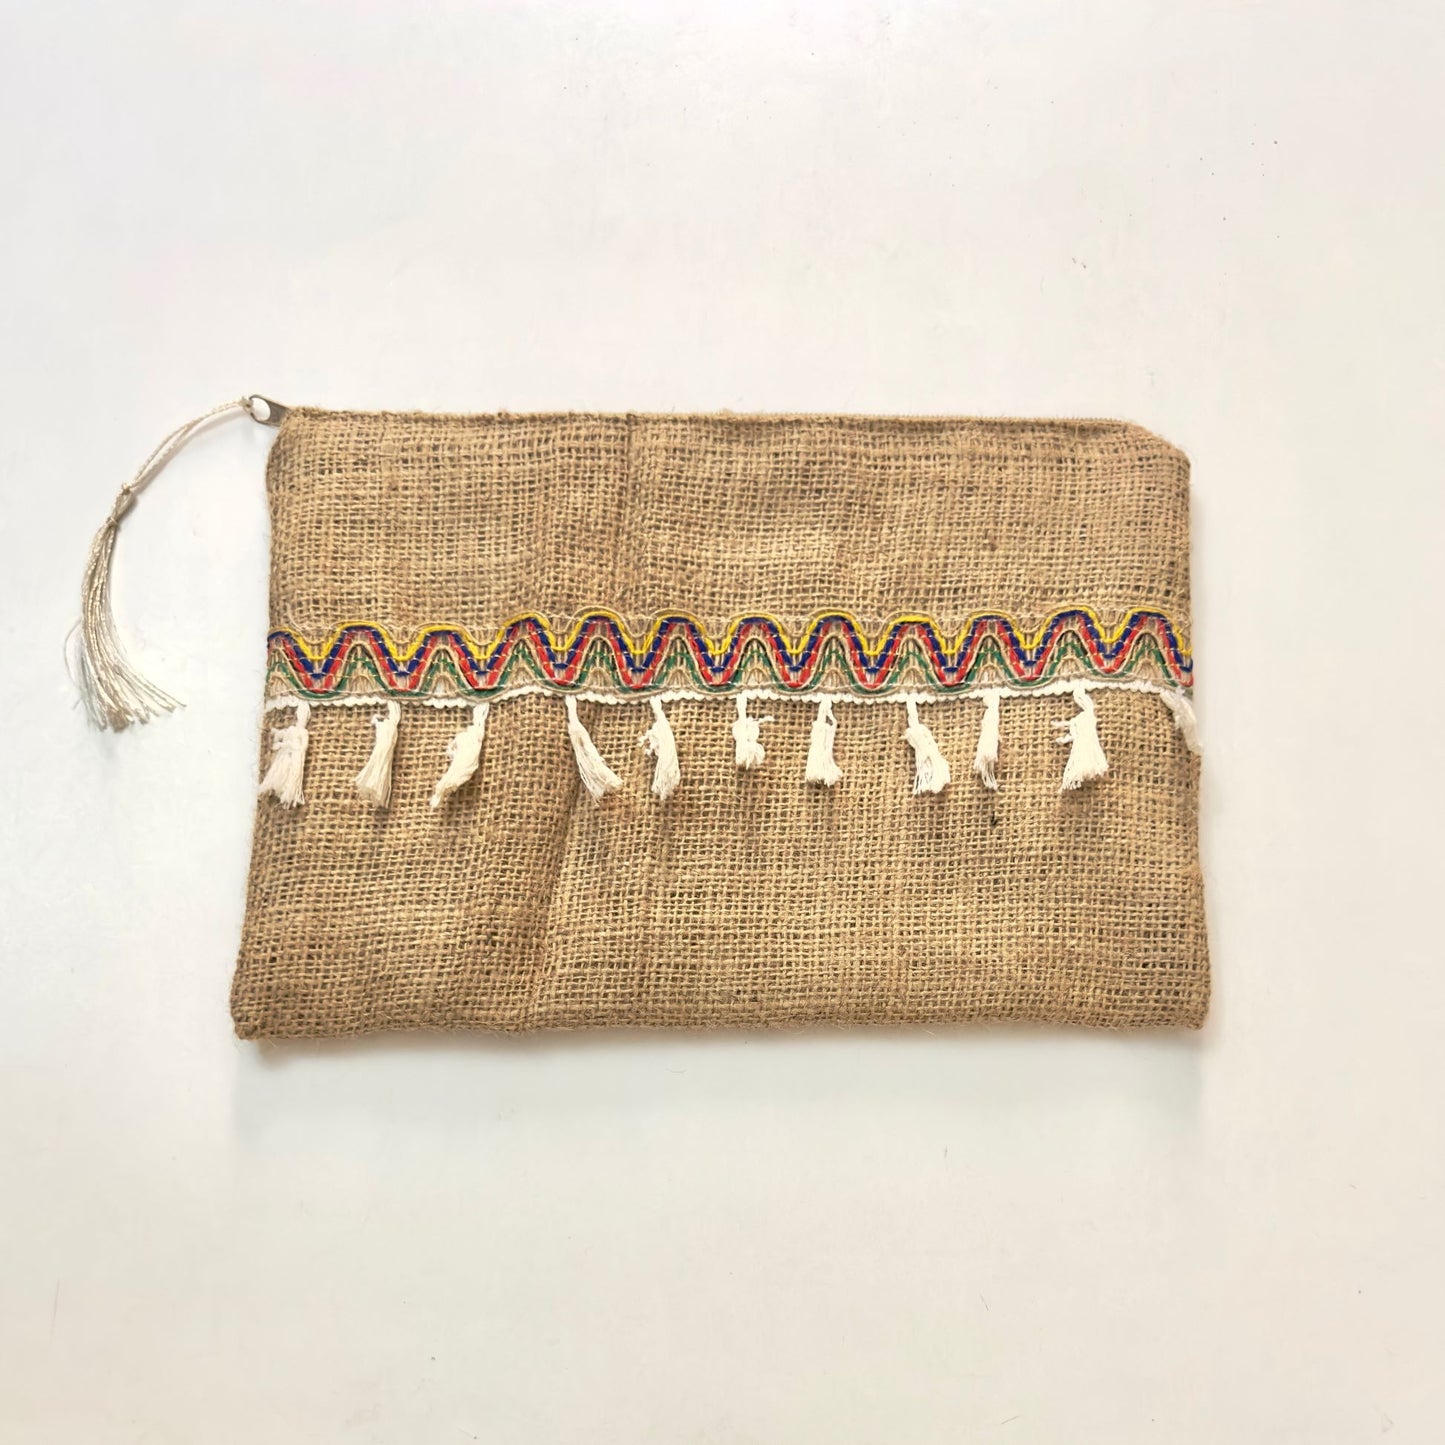 Jute rectangular clutch with fringes